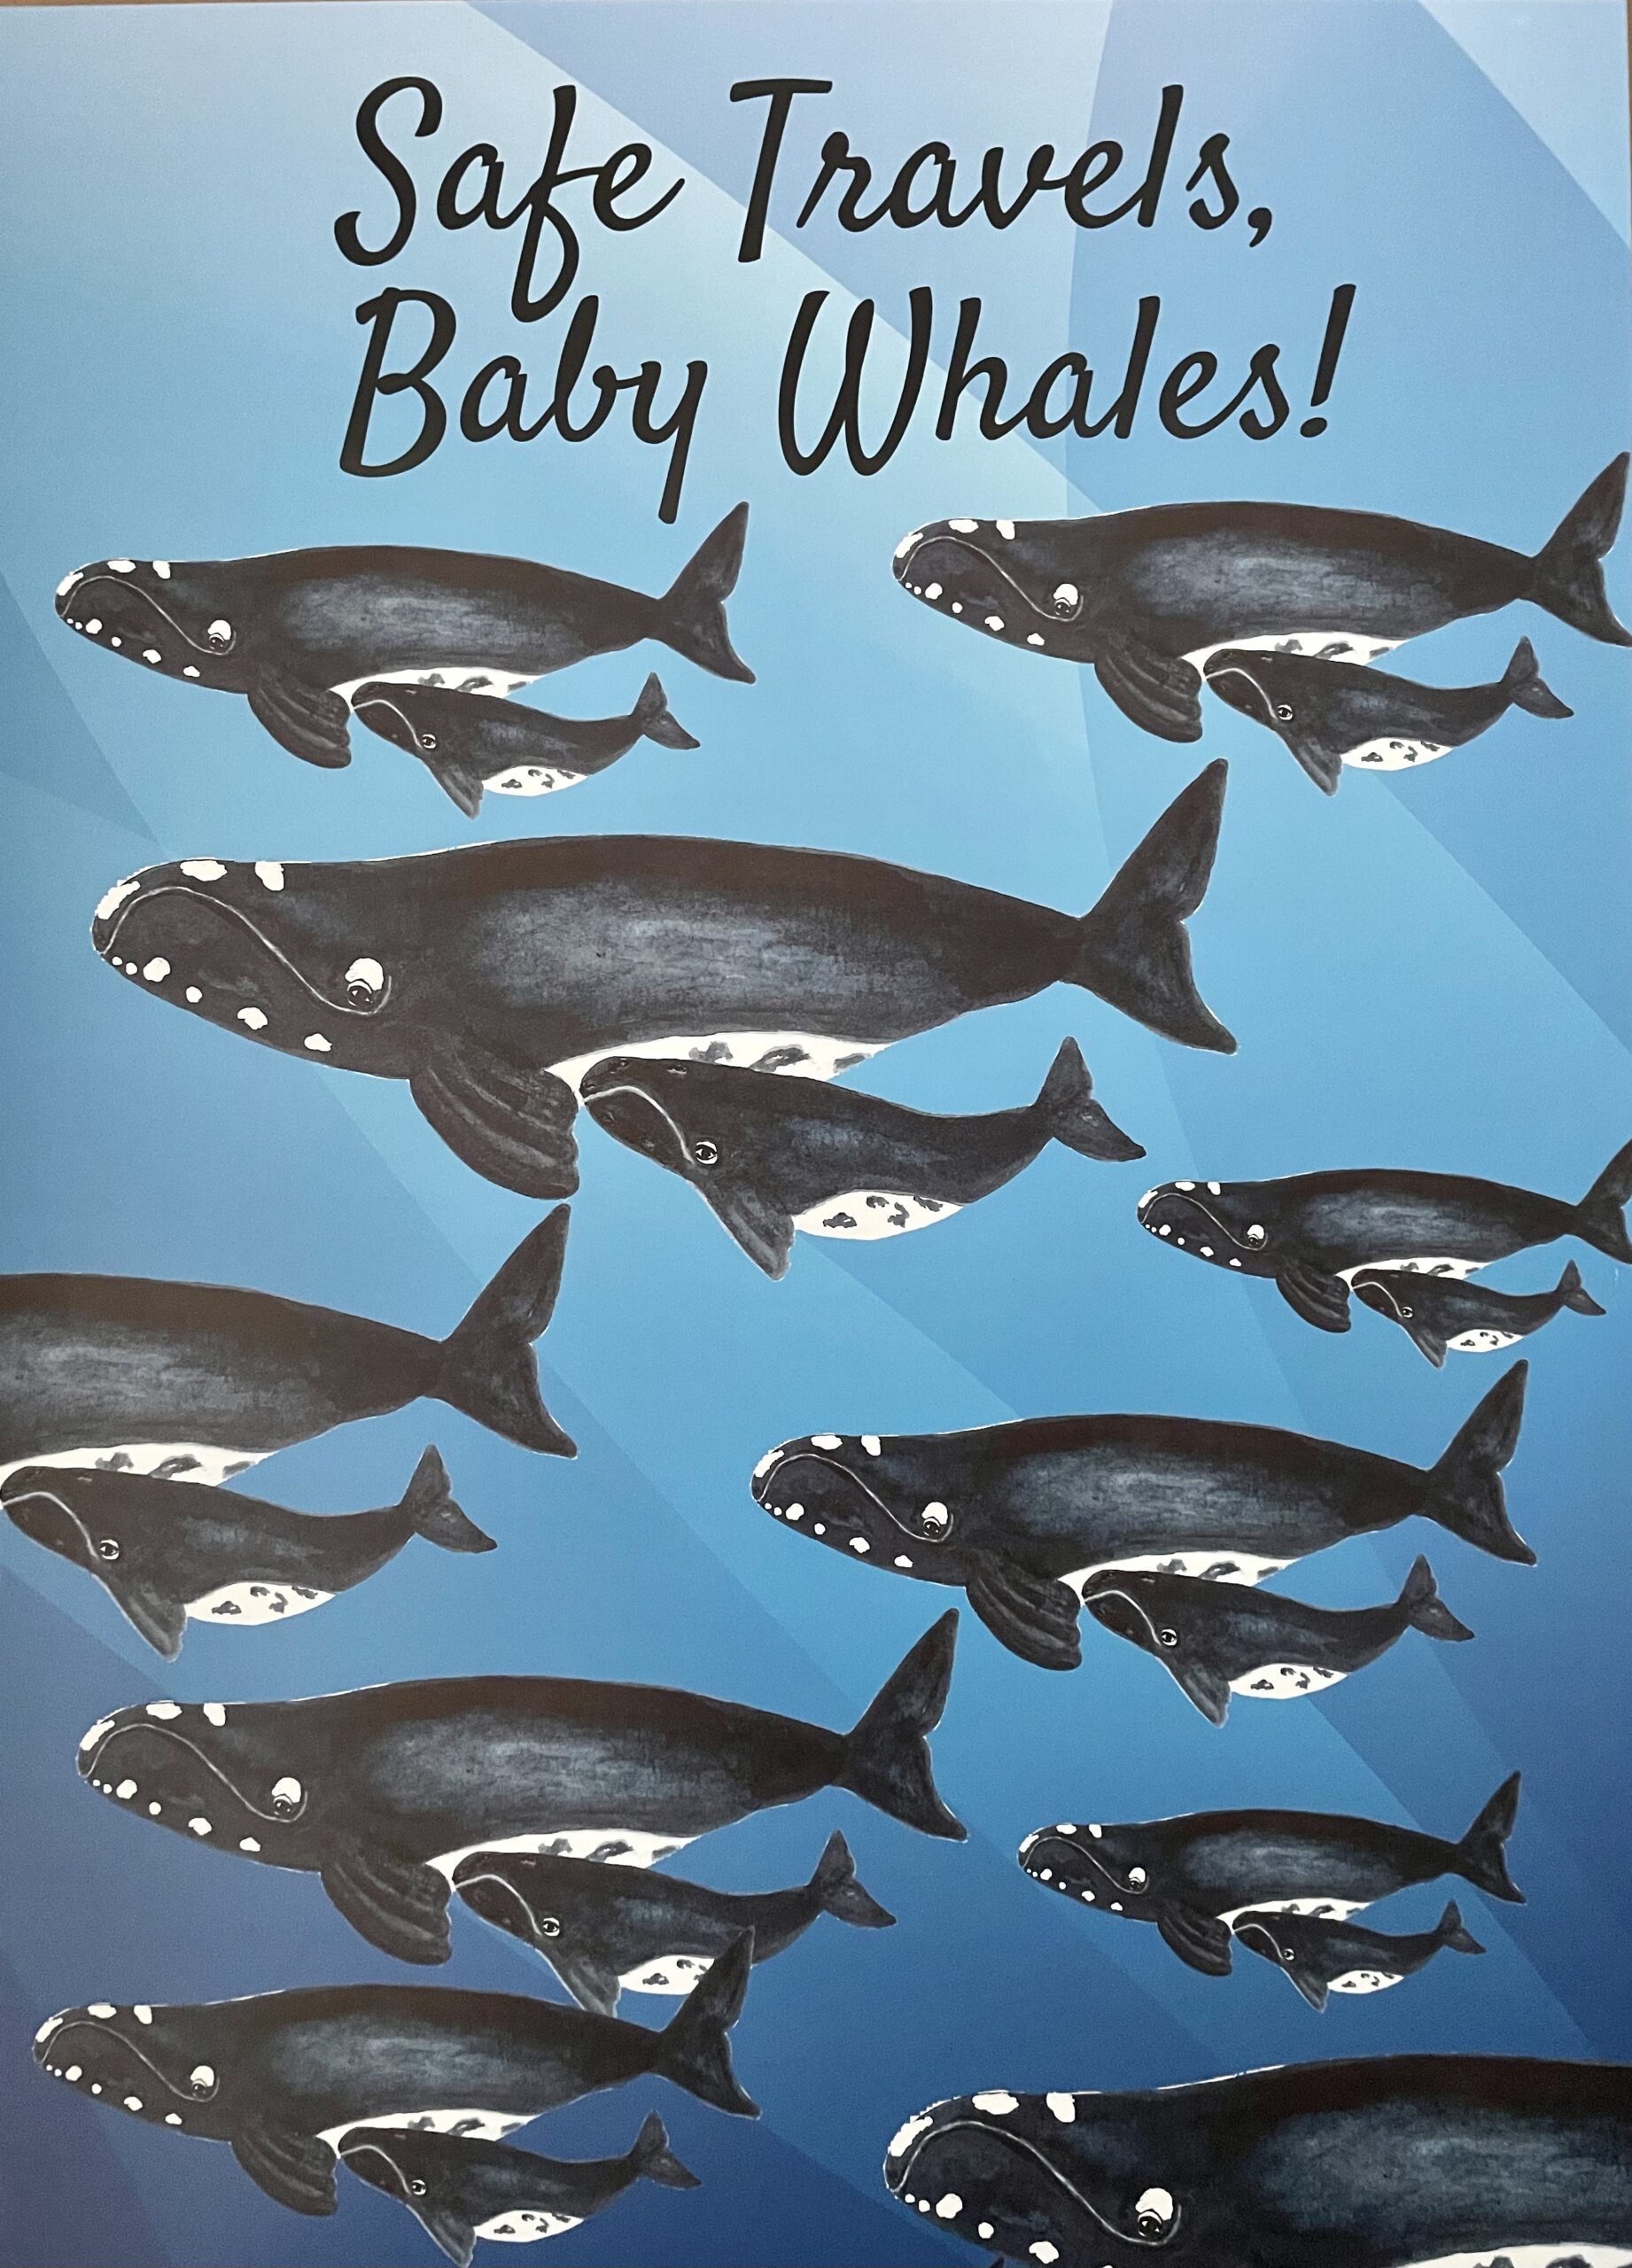 Celebrating 19 new calves at the Right Whale Baby Shower!